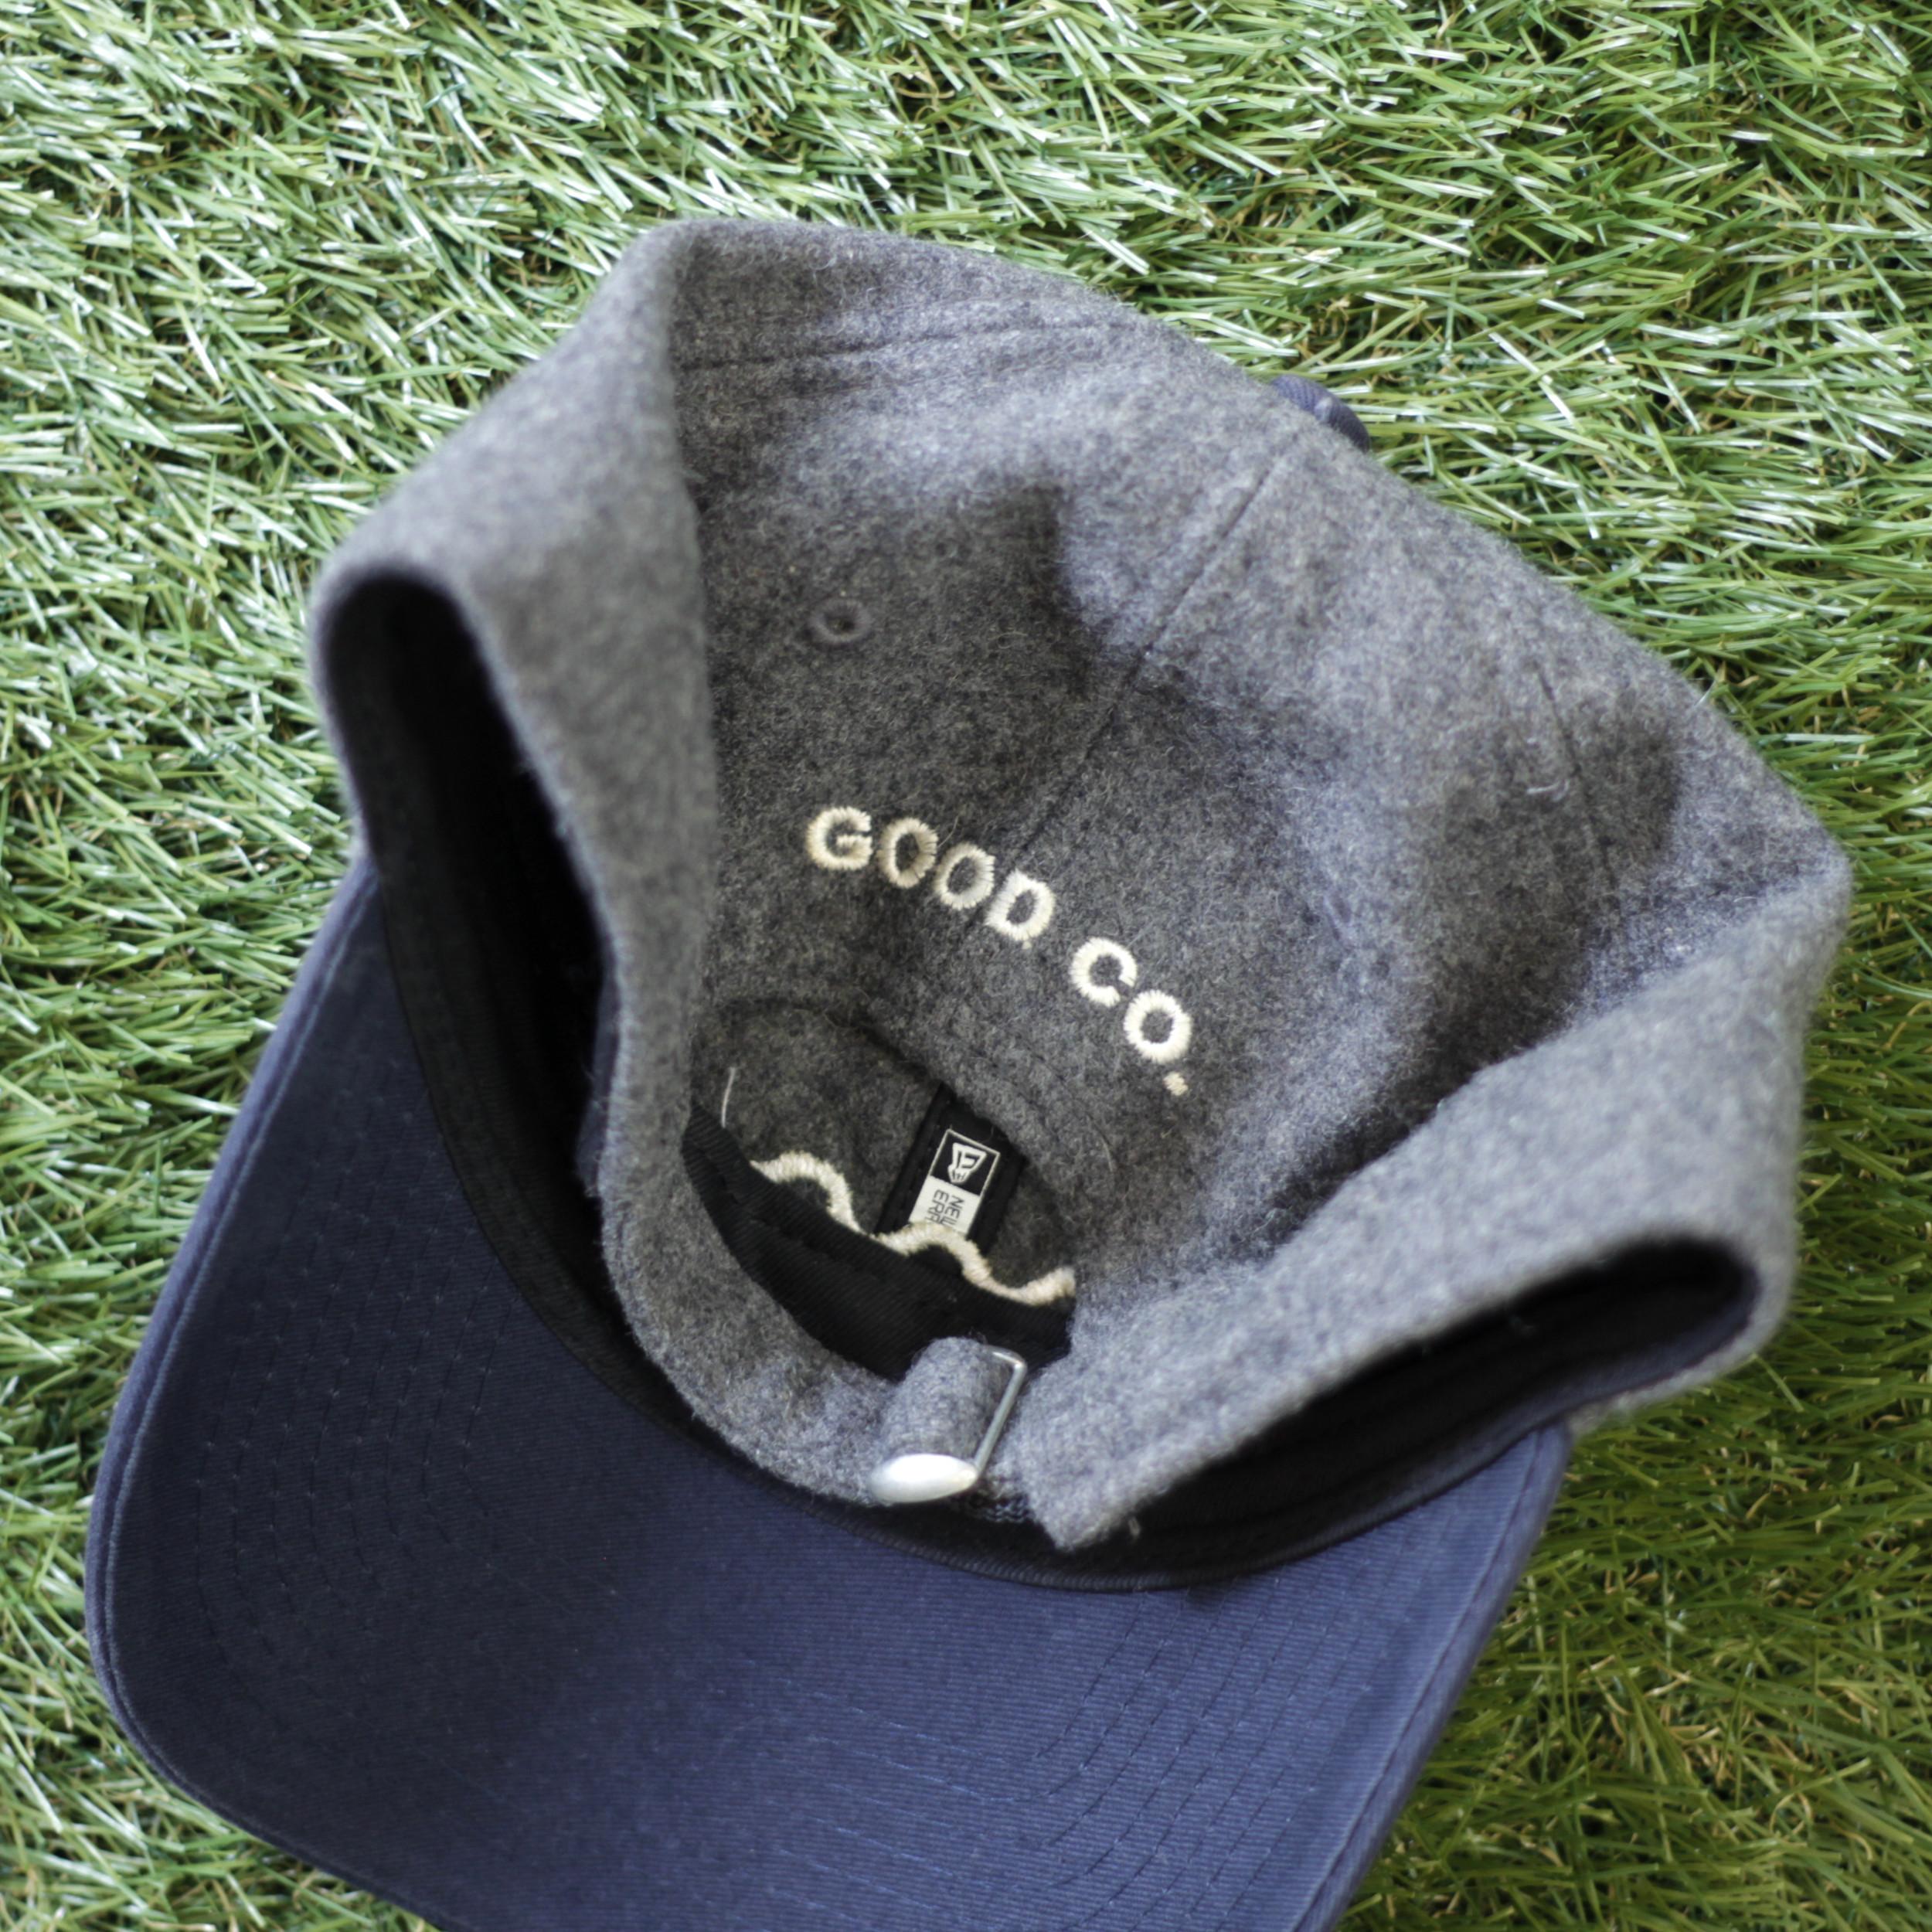 THE GOOD COMPANY × New Era / Chill Weave Wool Cap | NICE des ...